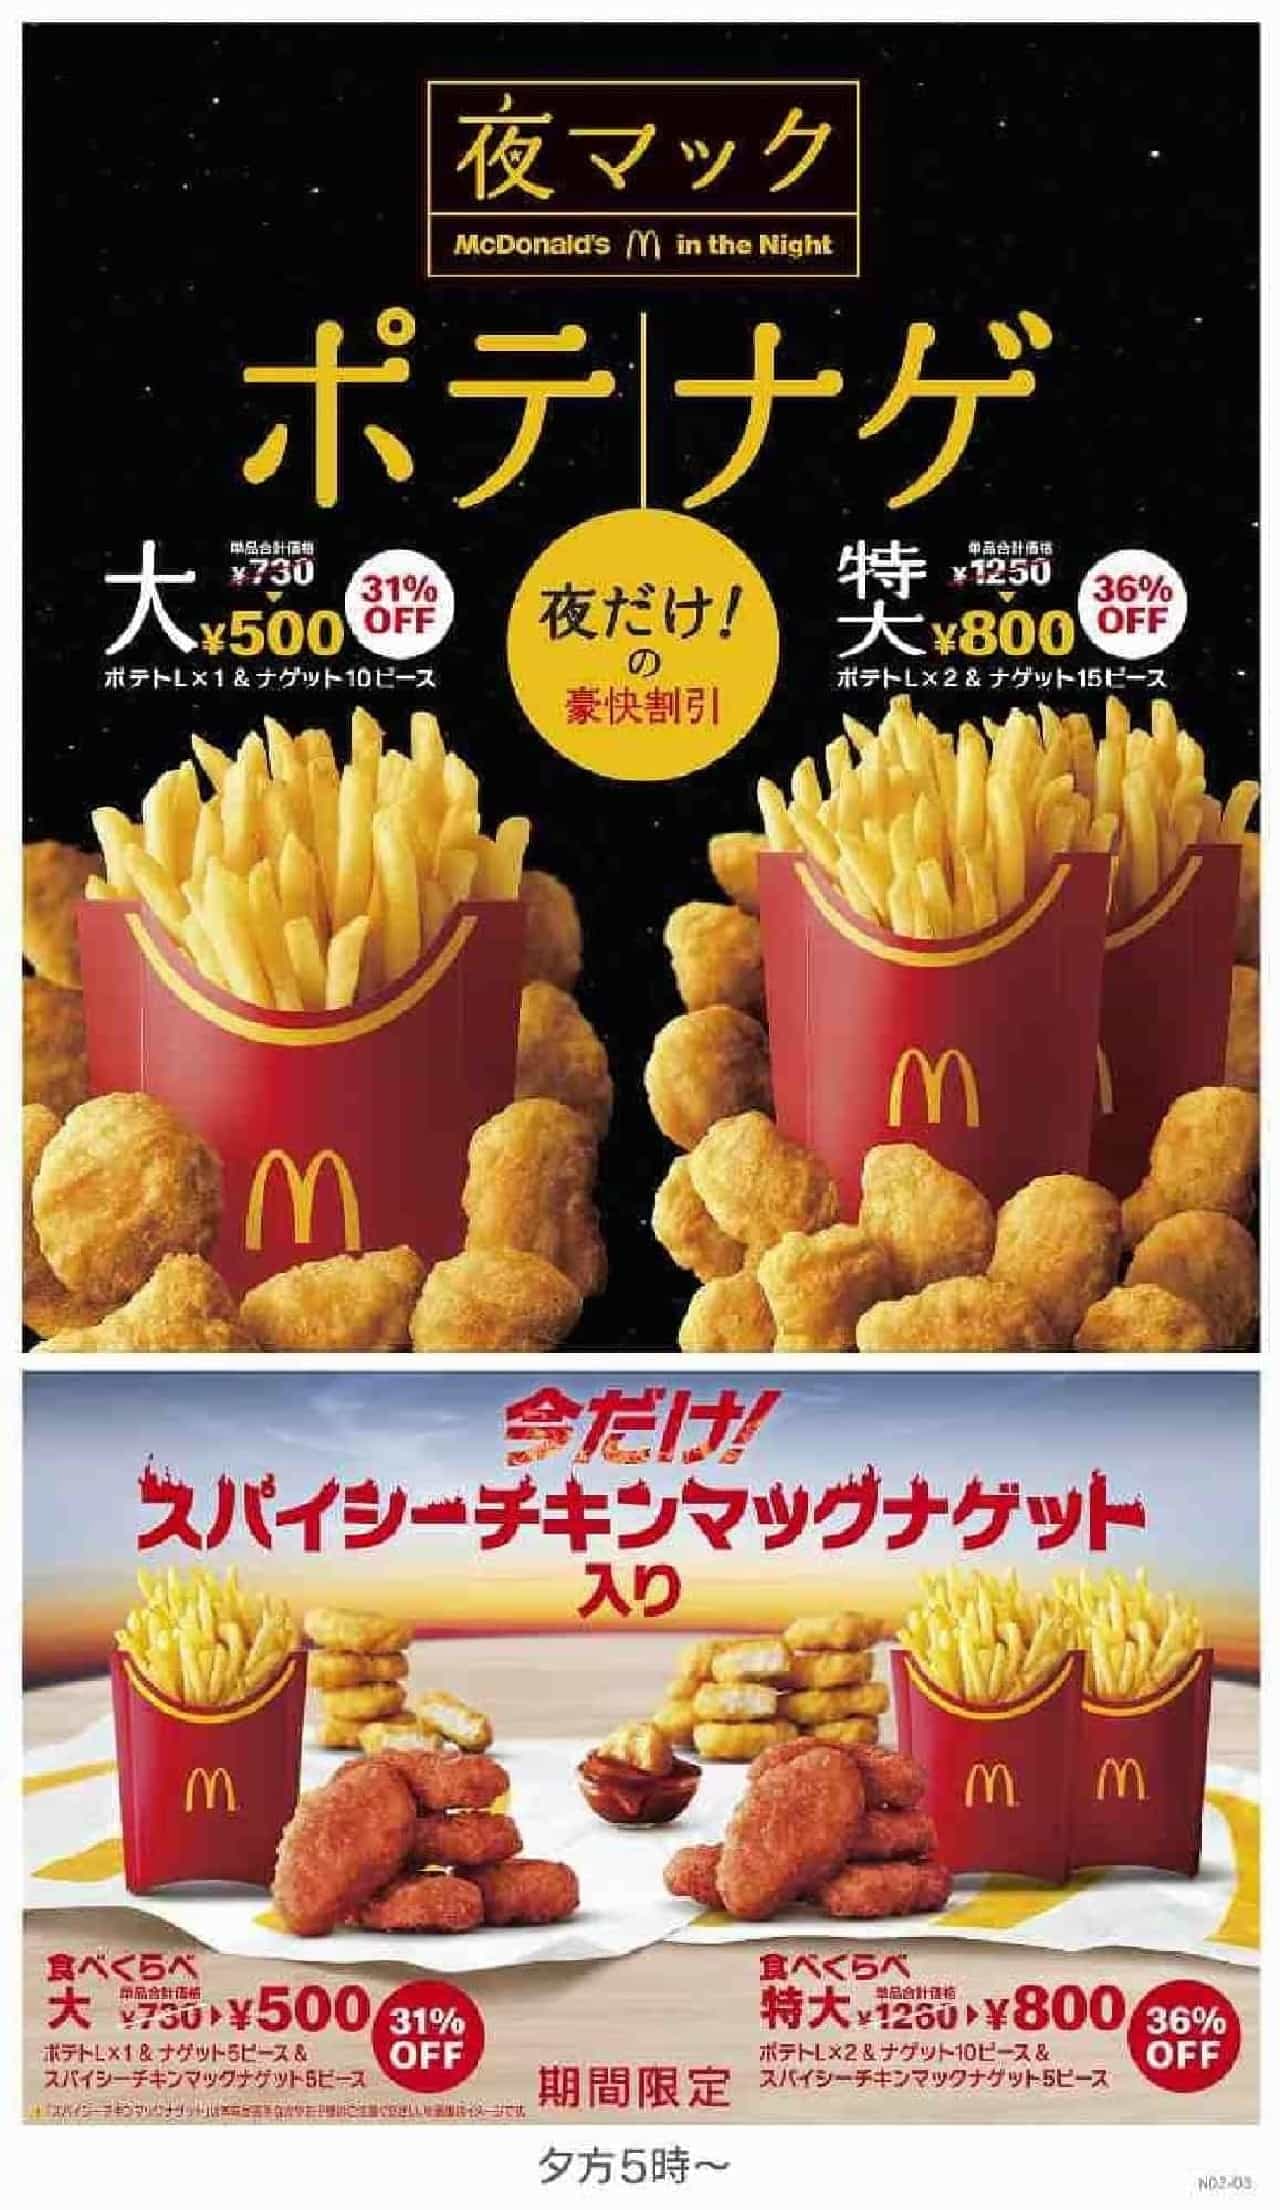 McDonald's "Eating Compare Potenage Large" and "Eating Compare Potenage Extra Large